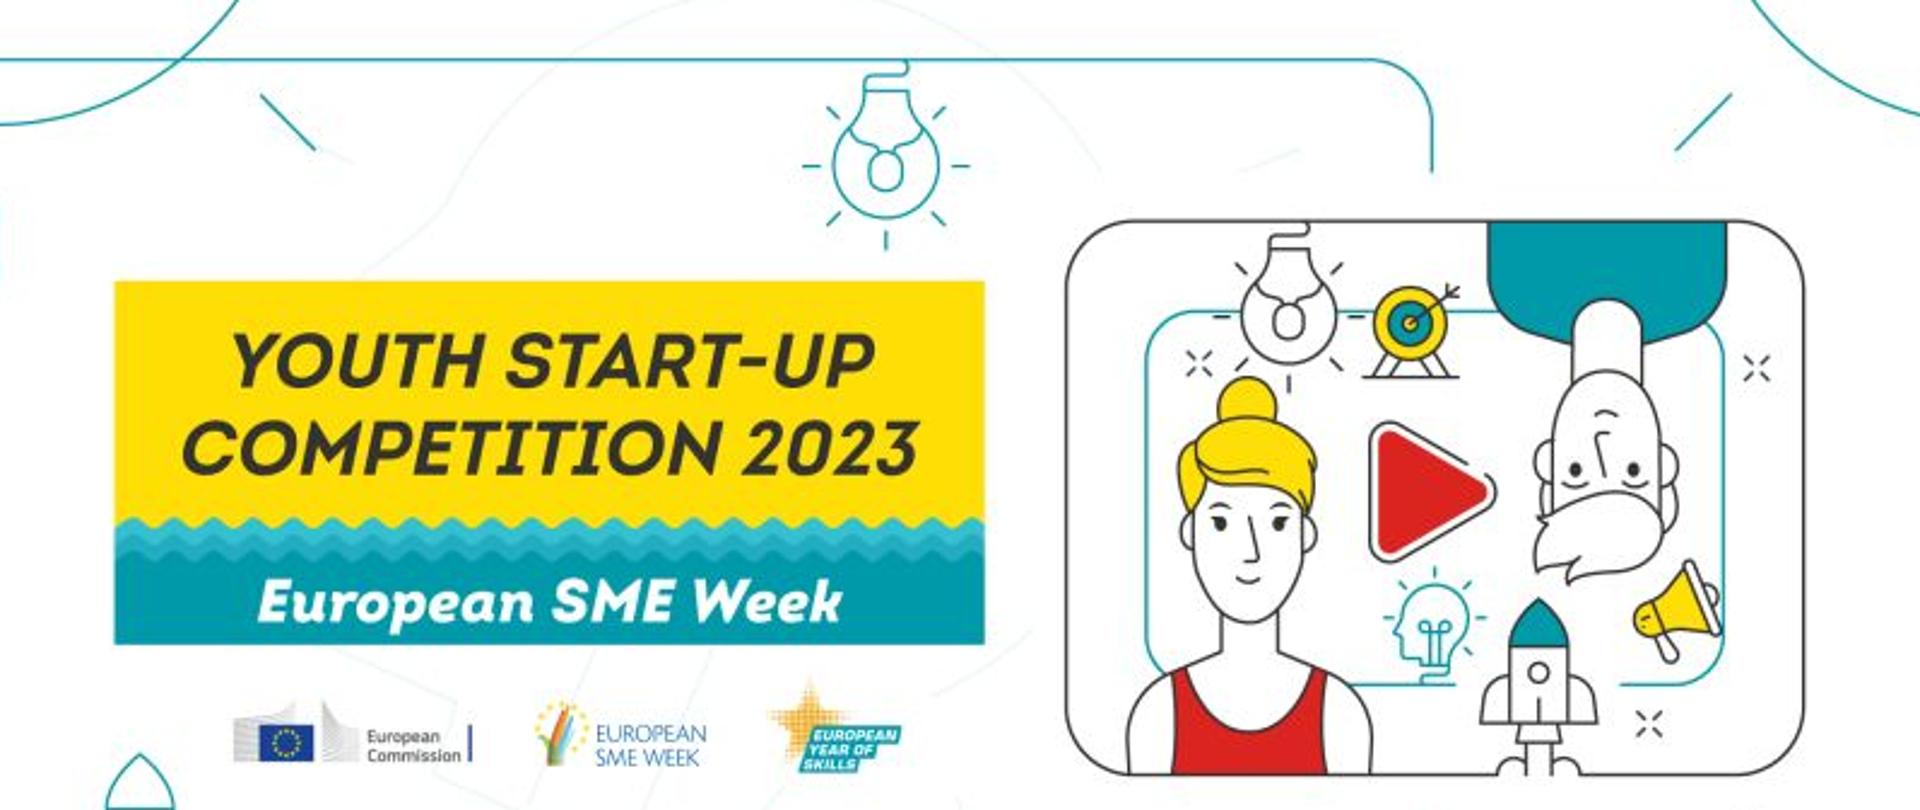 Youth Start-Up Competition 2023